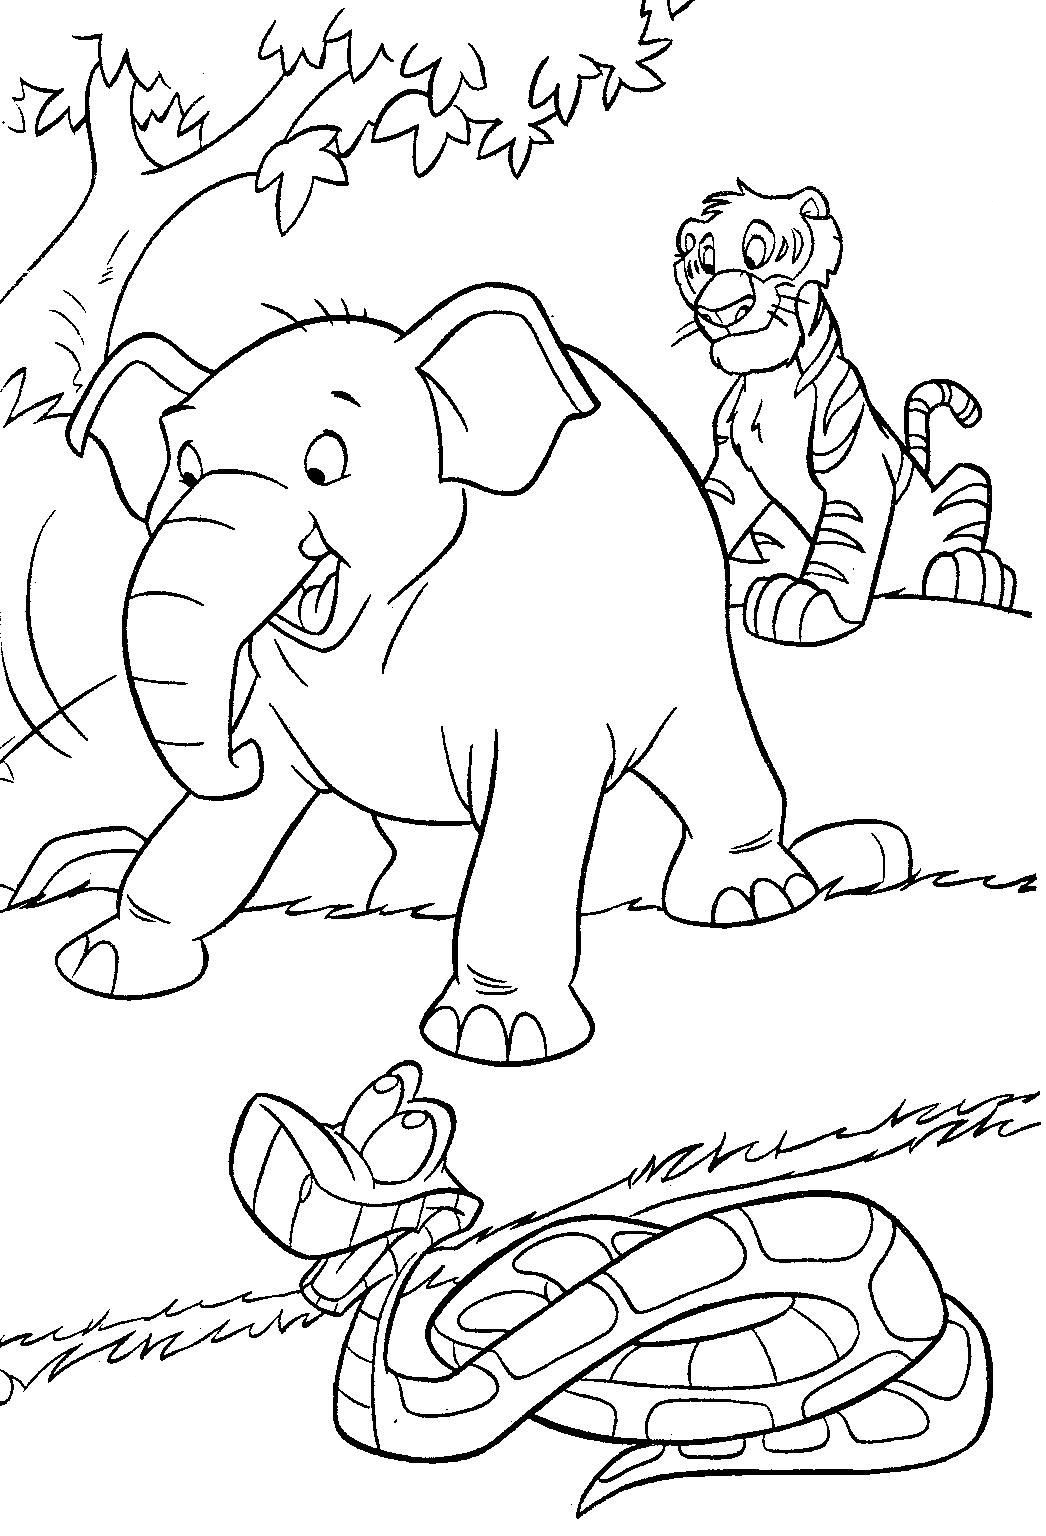 Free Jungle Books Coloring Pages   Coloring Cool